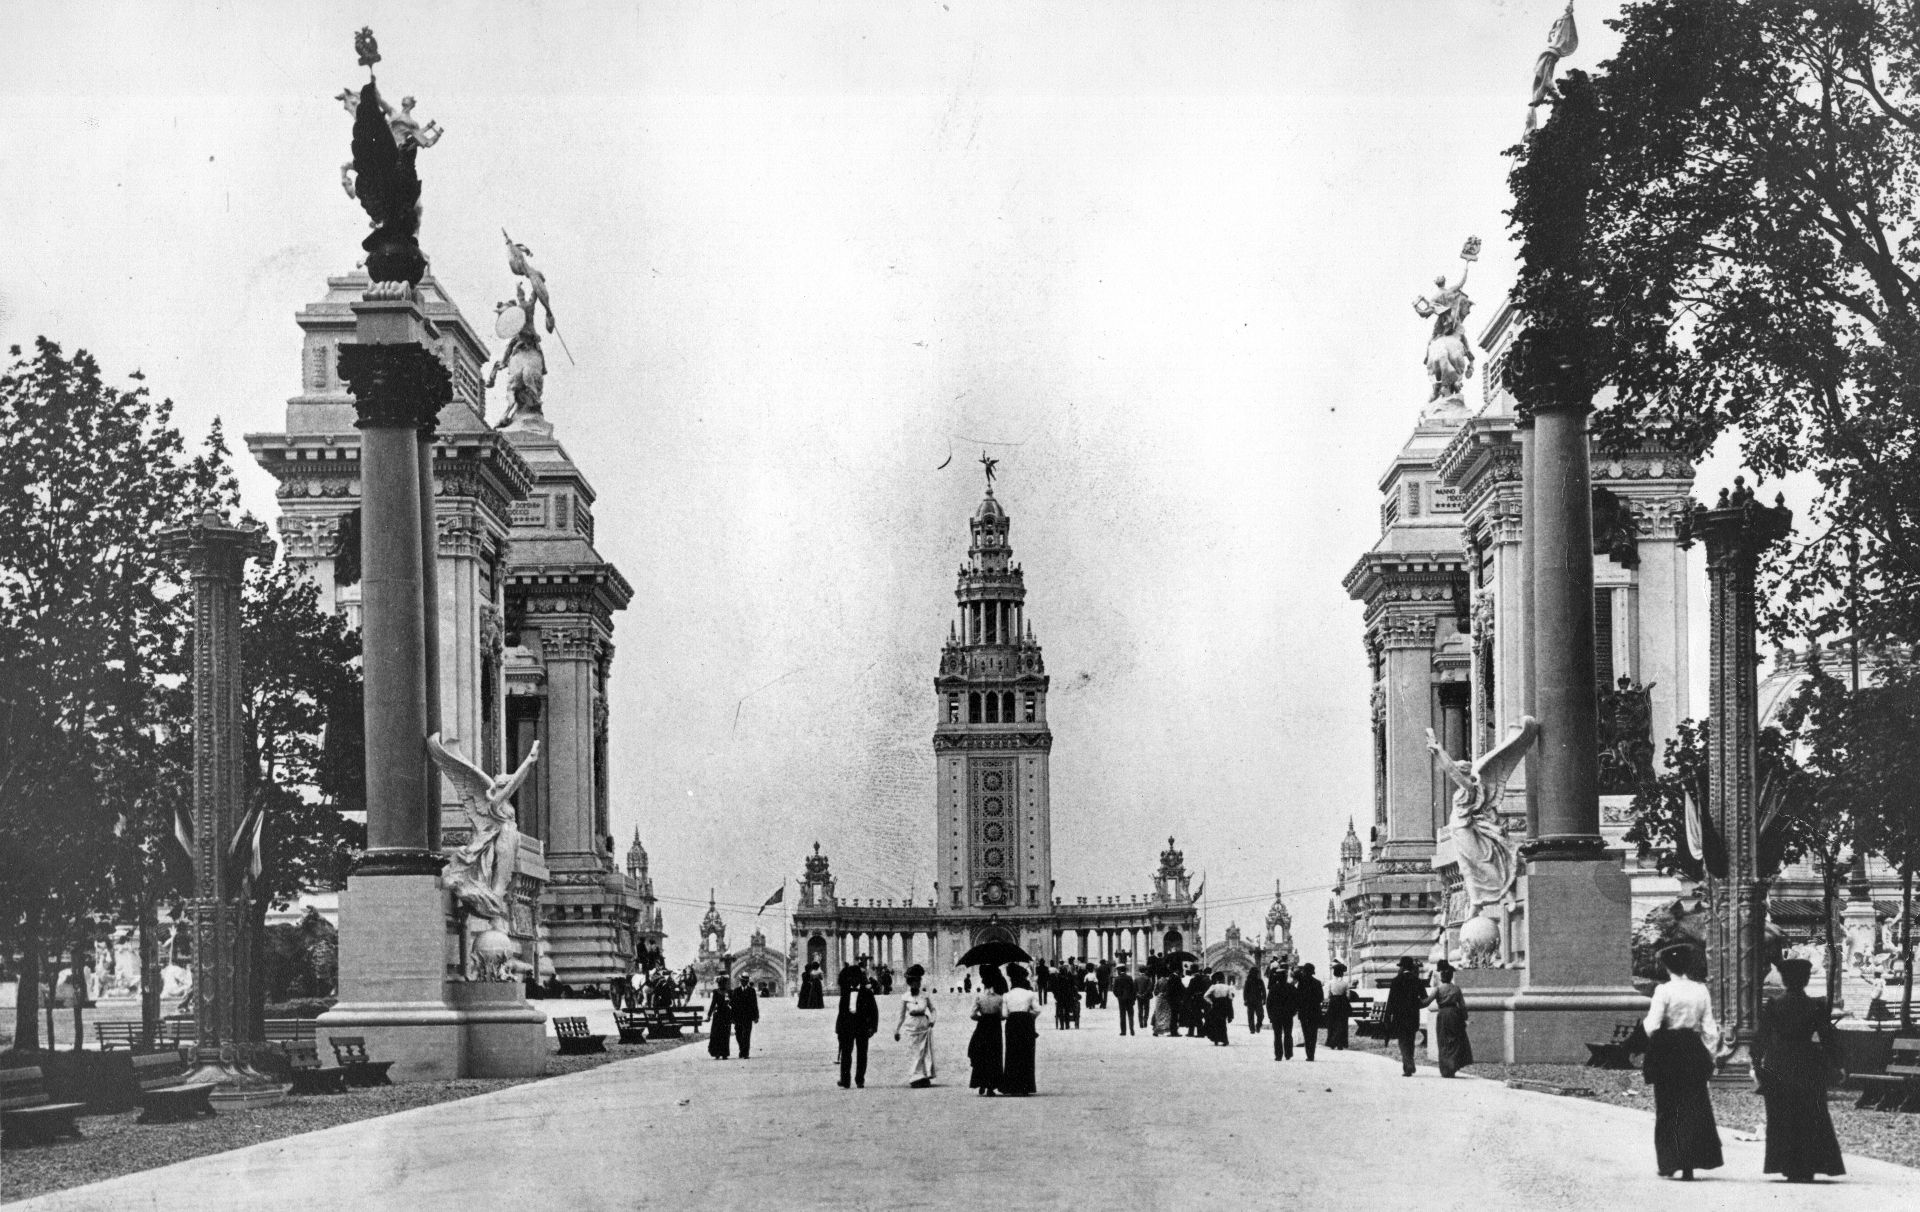 A Guide to Buffalo's 1901 Pan-American Exposition